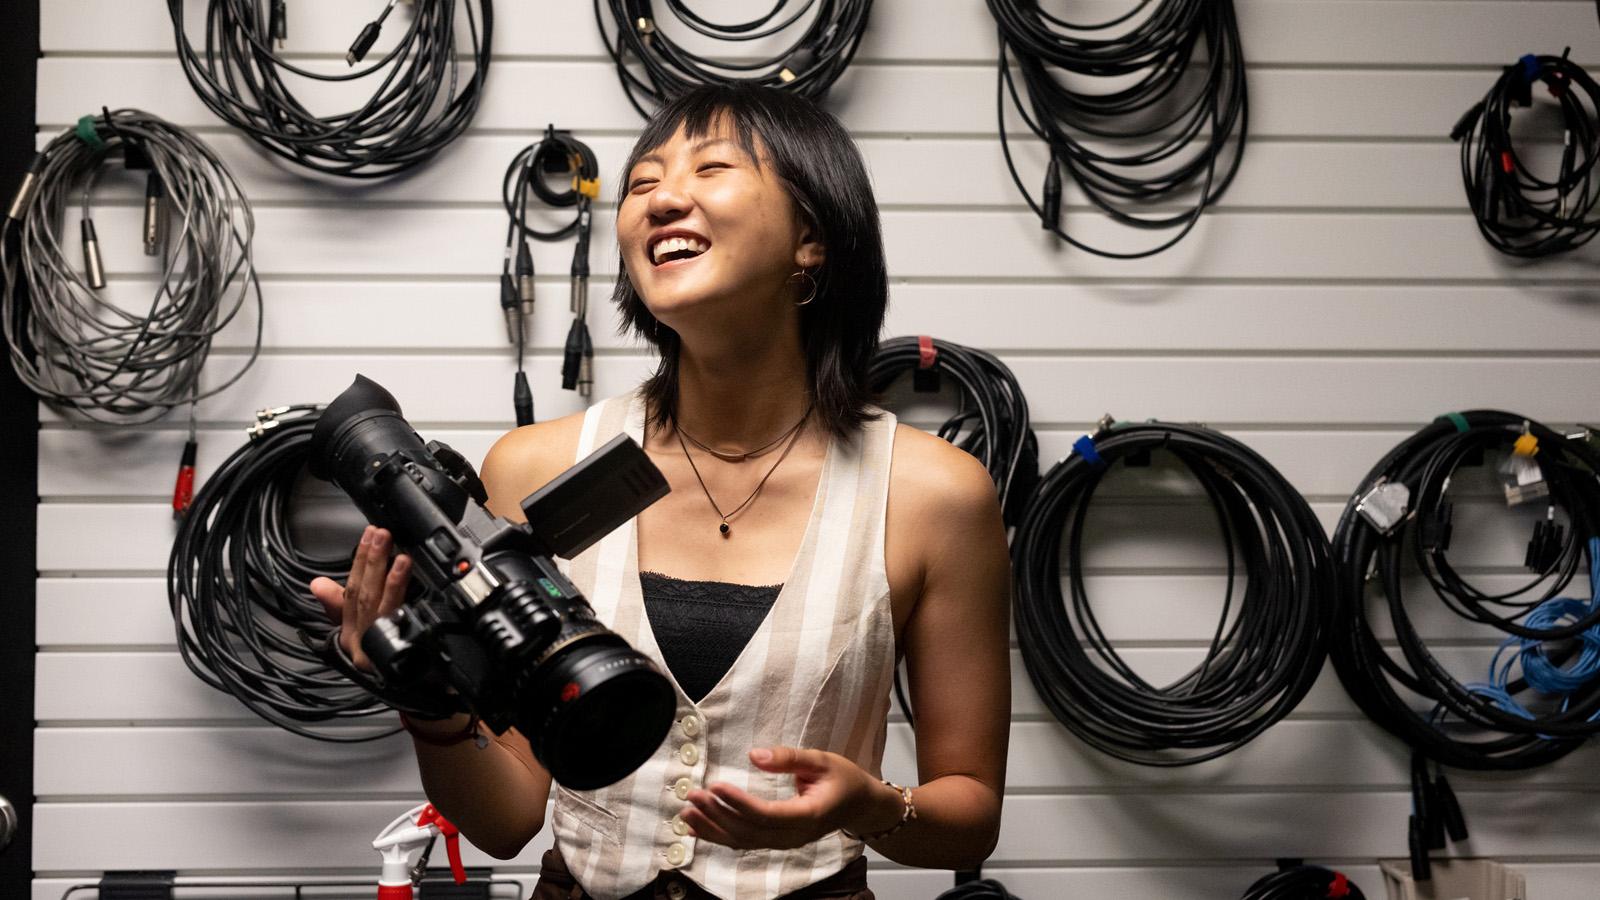 Standing in front of a wall where bundles of cables hang on hooks, a student holds a video camera and smiles.